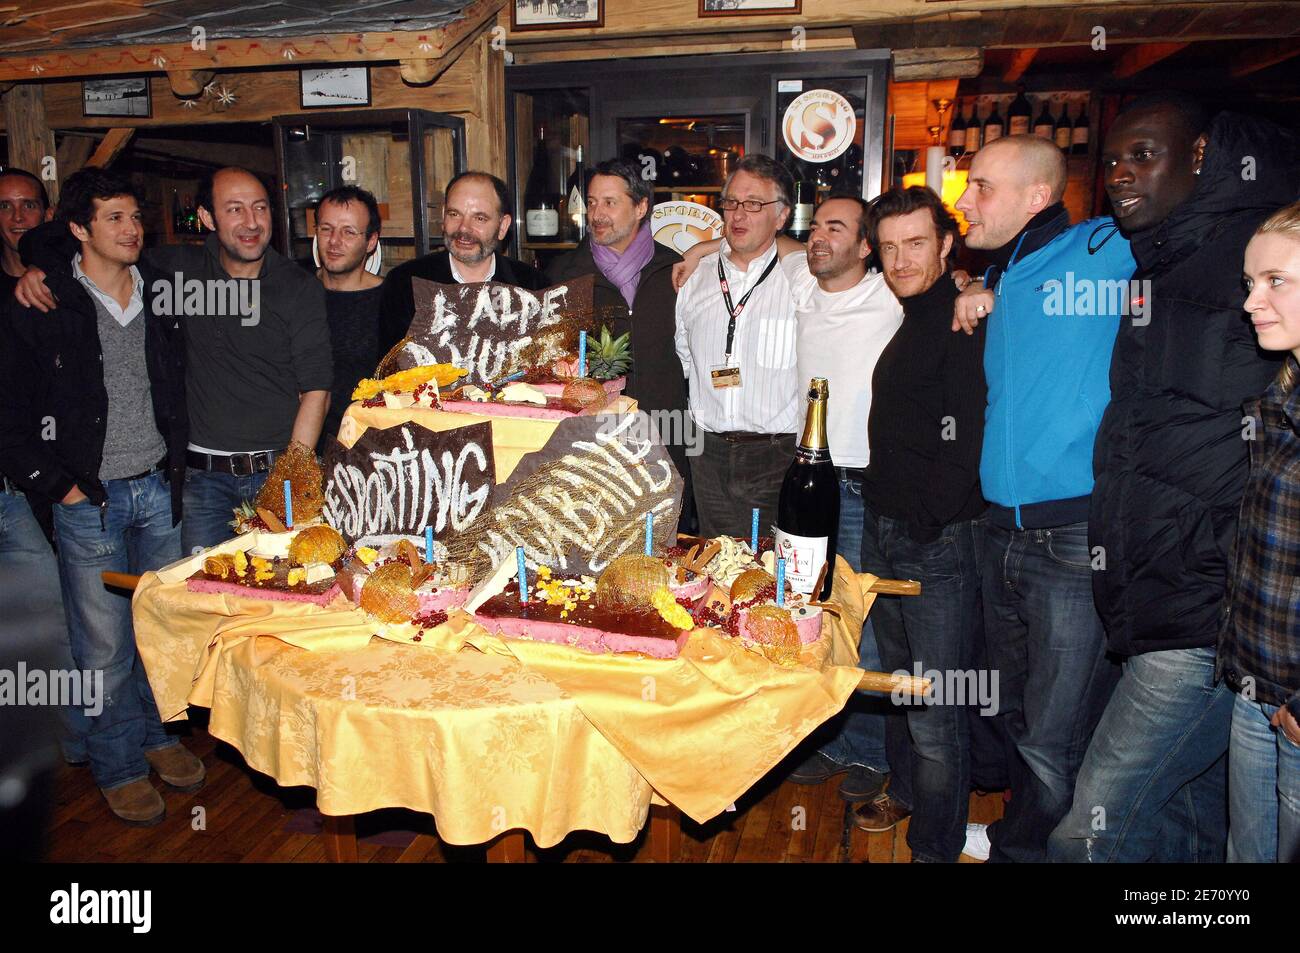 French actors Guillaume Canet, Kad Merad, Pierre-Francois Martin-Laval, Jean-Pierre Darroussin, Antoine de Caunes, unidentified person, Bruno Solo, Thierry Fremont, Omar and Fred pose after the openig ceremony of the 10th International Comedy Film Festival in L'Alpe d'Huez, France, on January 16, 2007. Photo by Guibbaud-Guignebourg/ABACAPRESS.COM Stock Photo